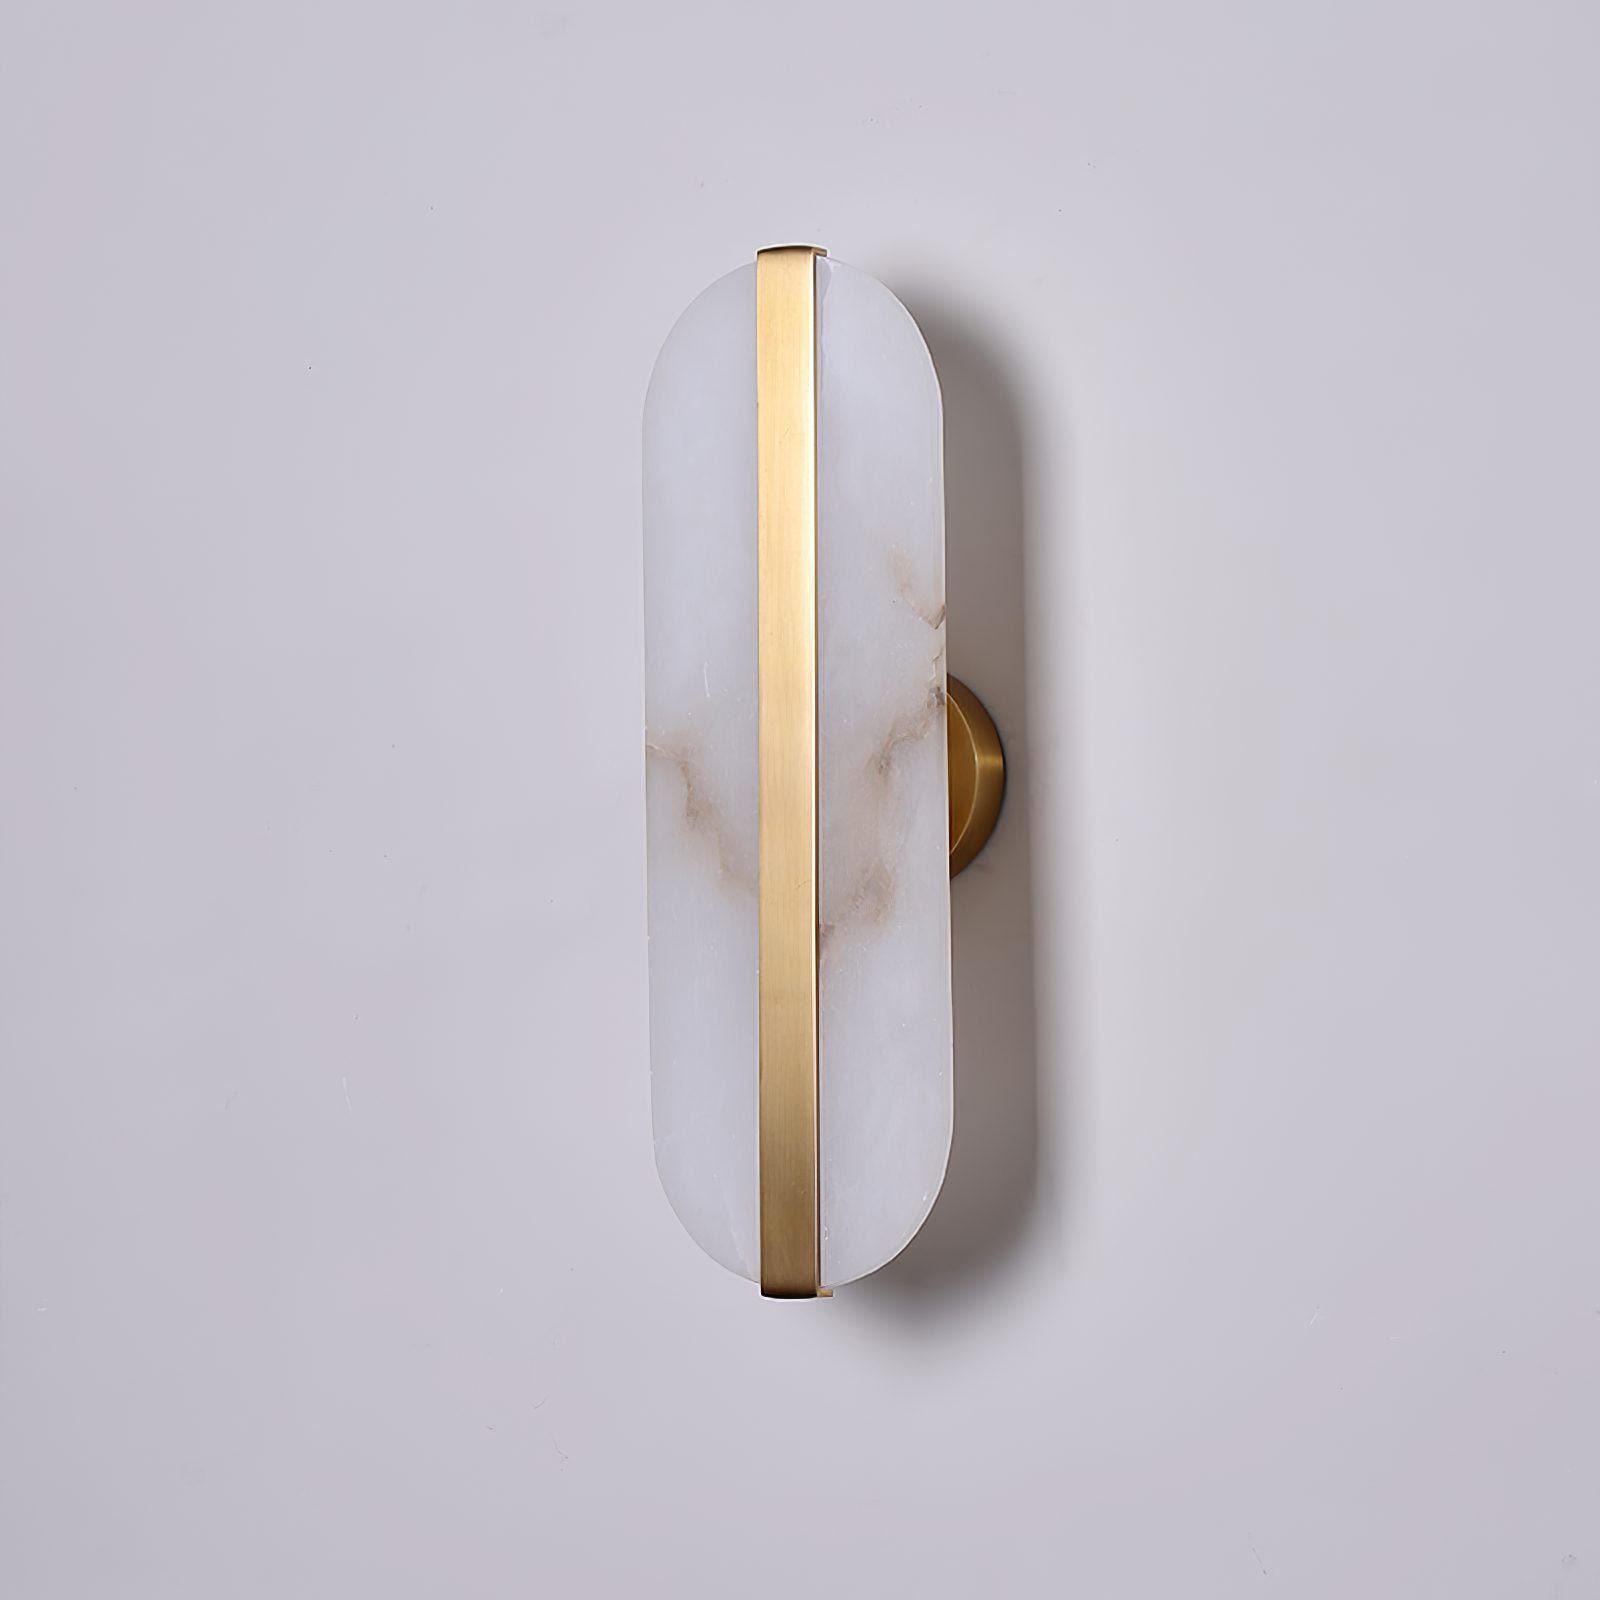 Set of 2 Alabaster LED Sconces with Stone Wall Design in Brass and White